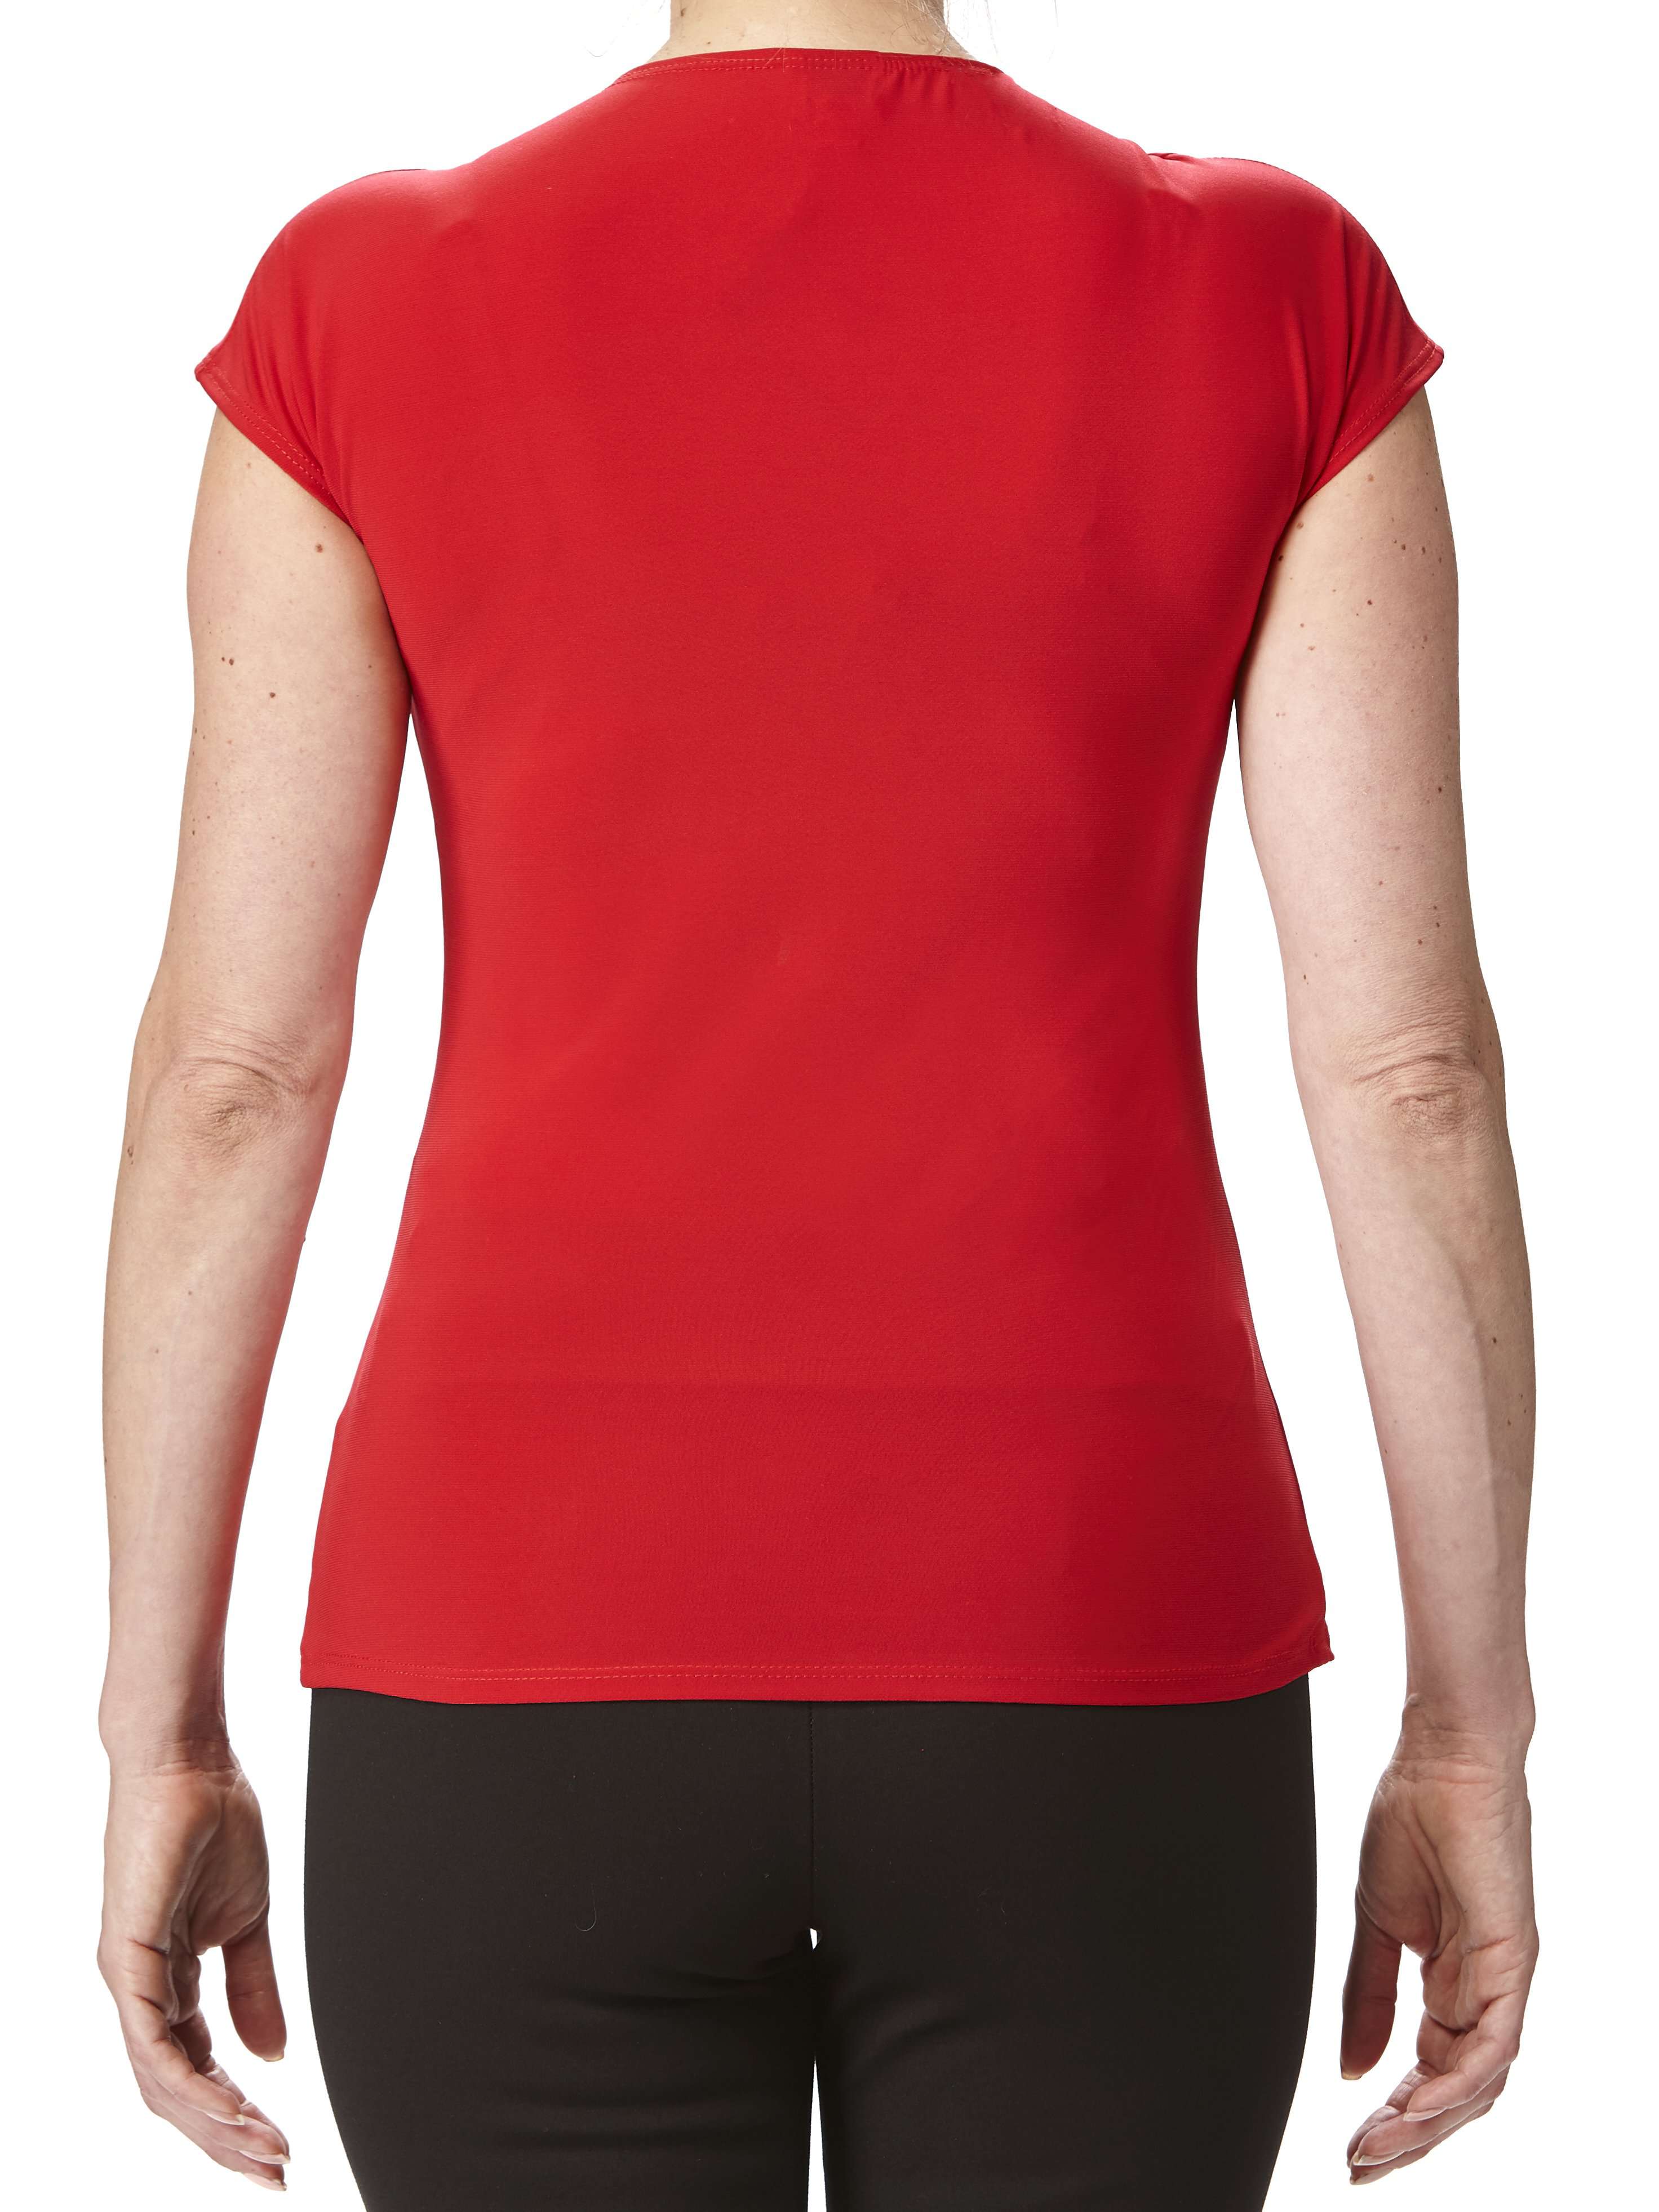 Women's Top Red Twist Front Flattering Fit Essential Quality Top Made in Canada - Yvonne Marie - Yvonne Marie